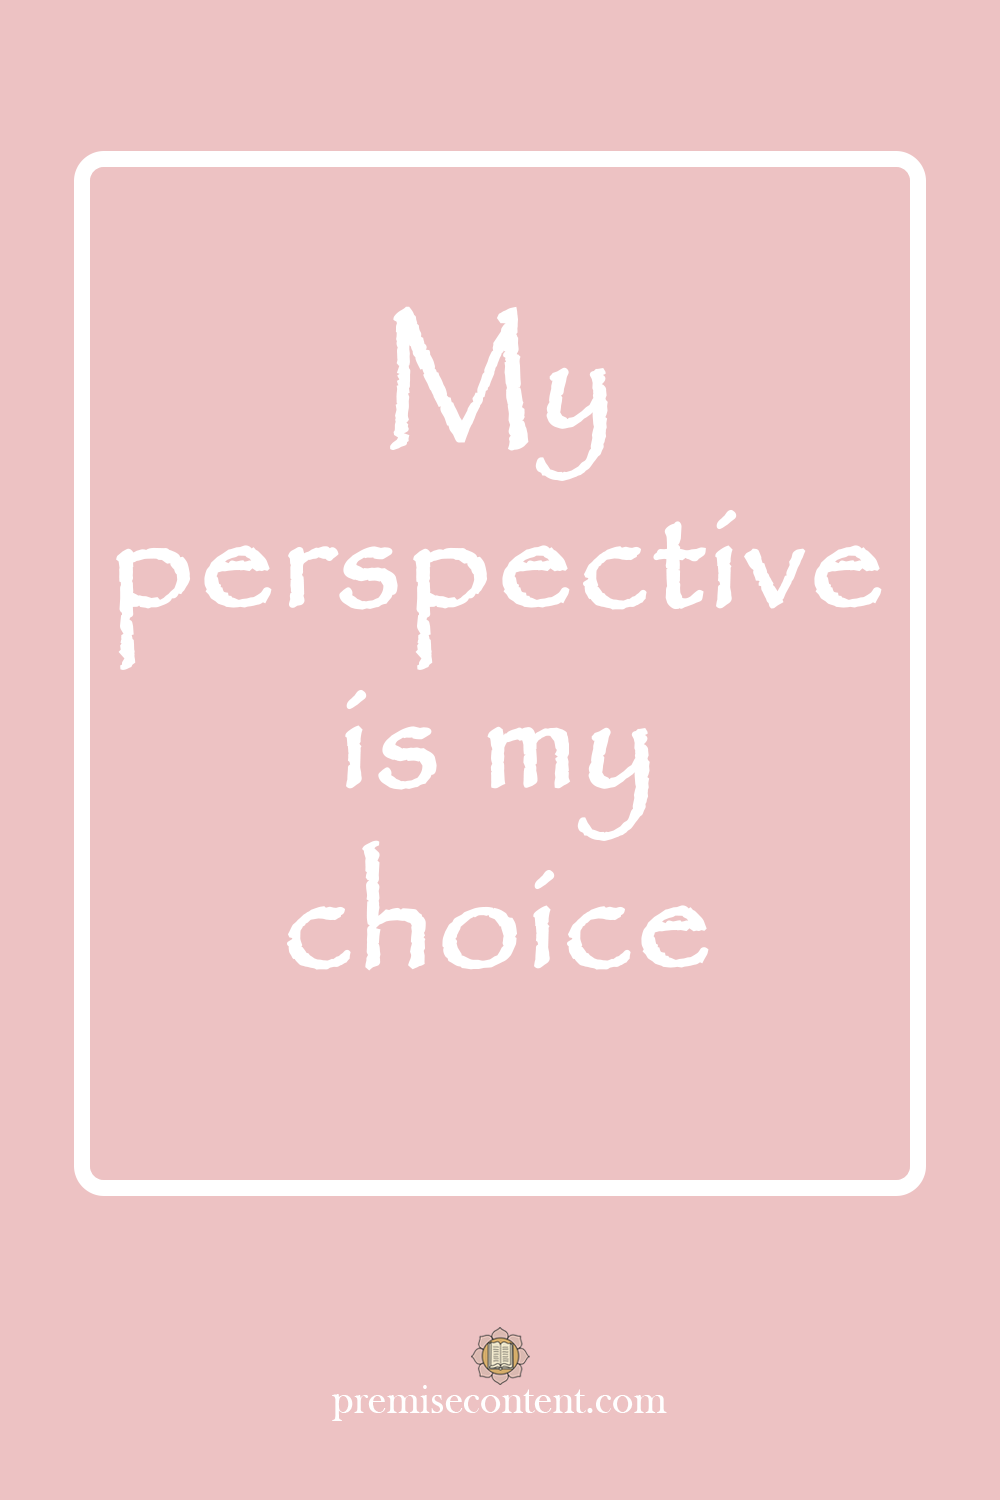 Positive Affirmation - My perspective is my choice.